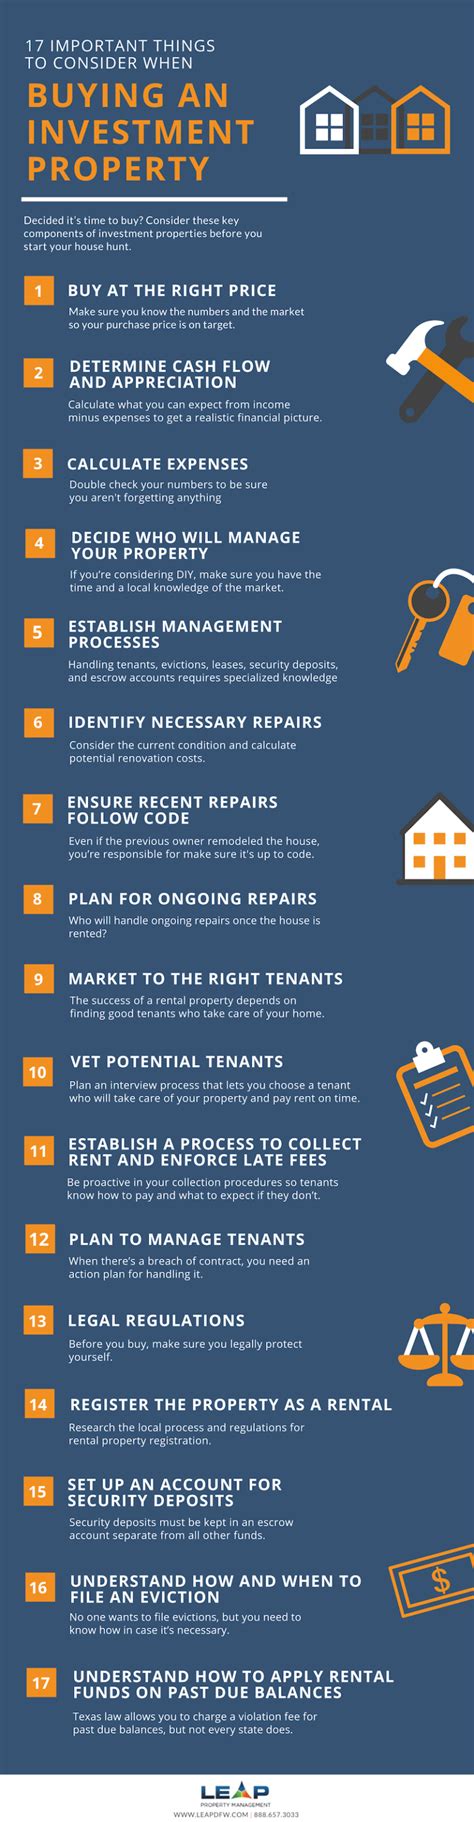 17 Things To Consider When Buying Investment Property Checklist